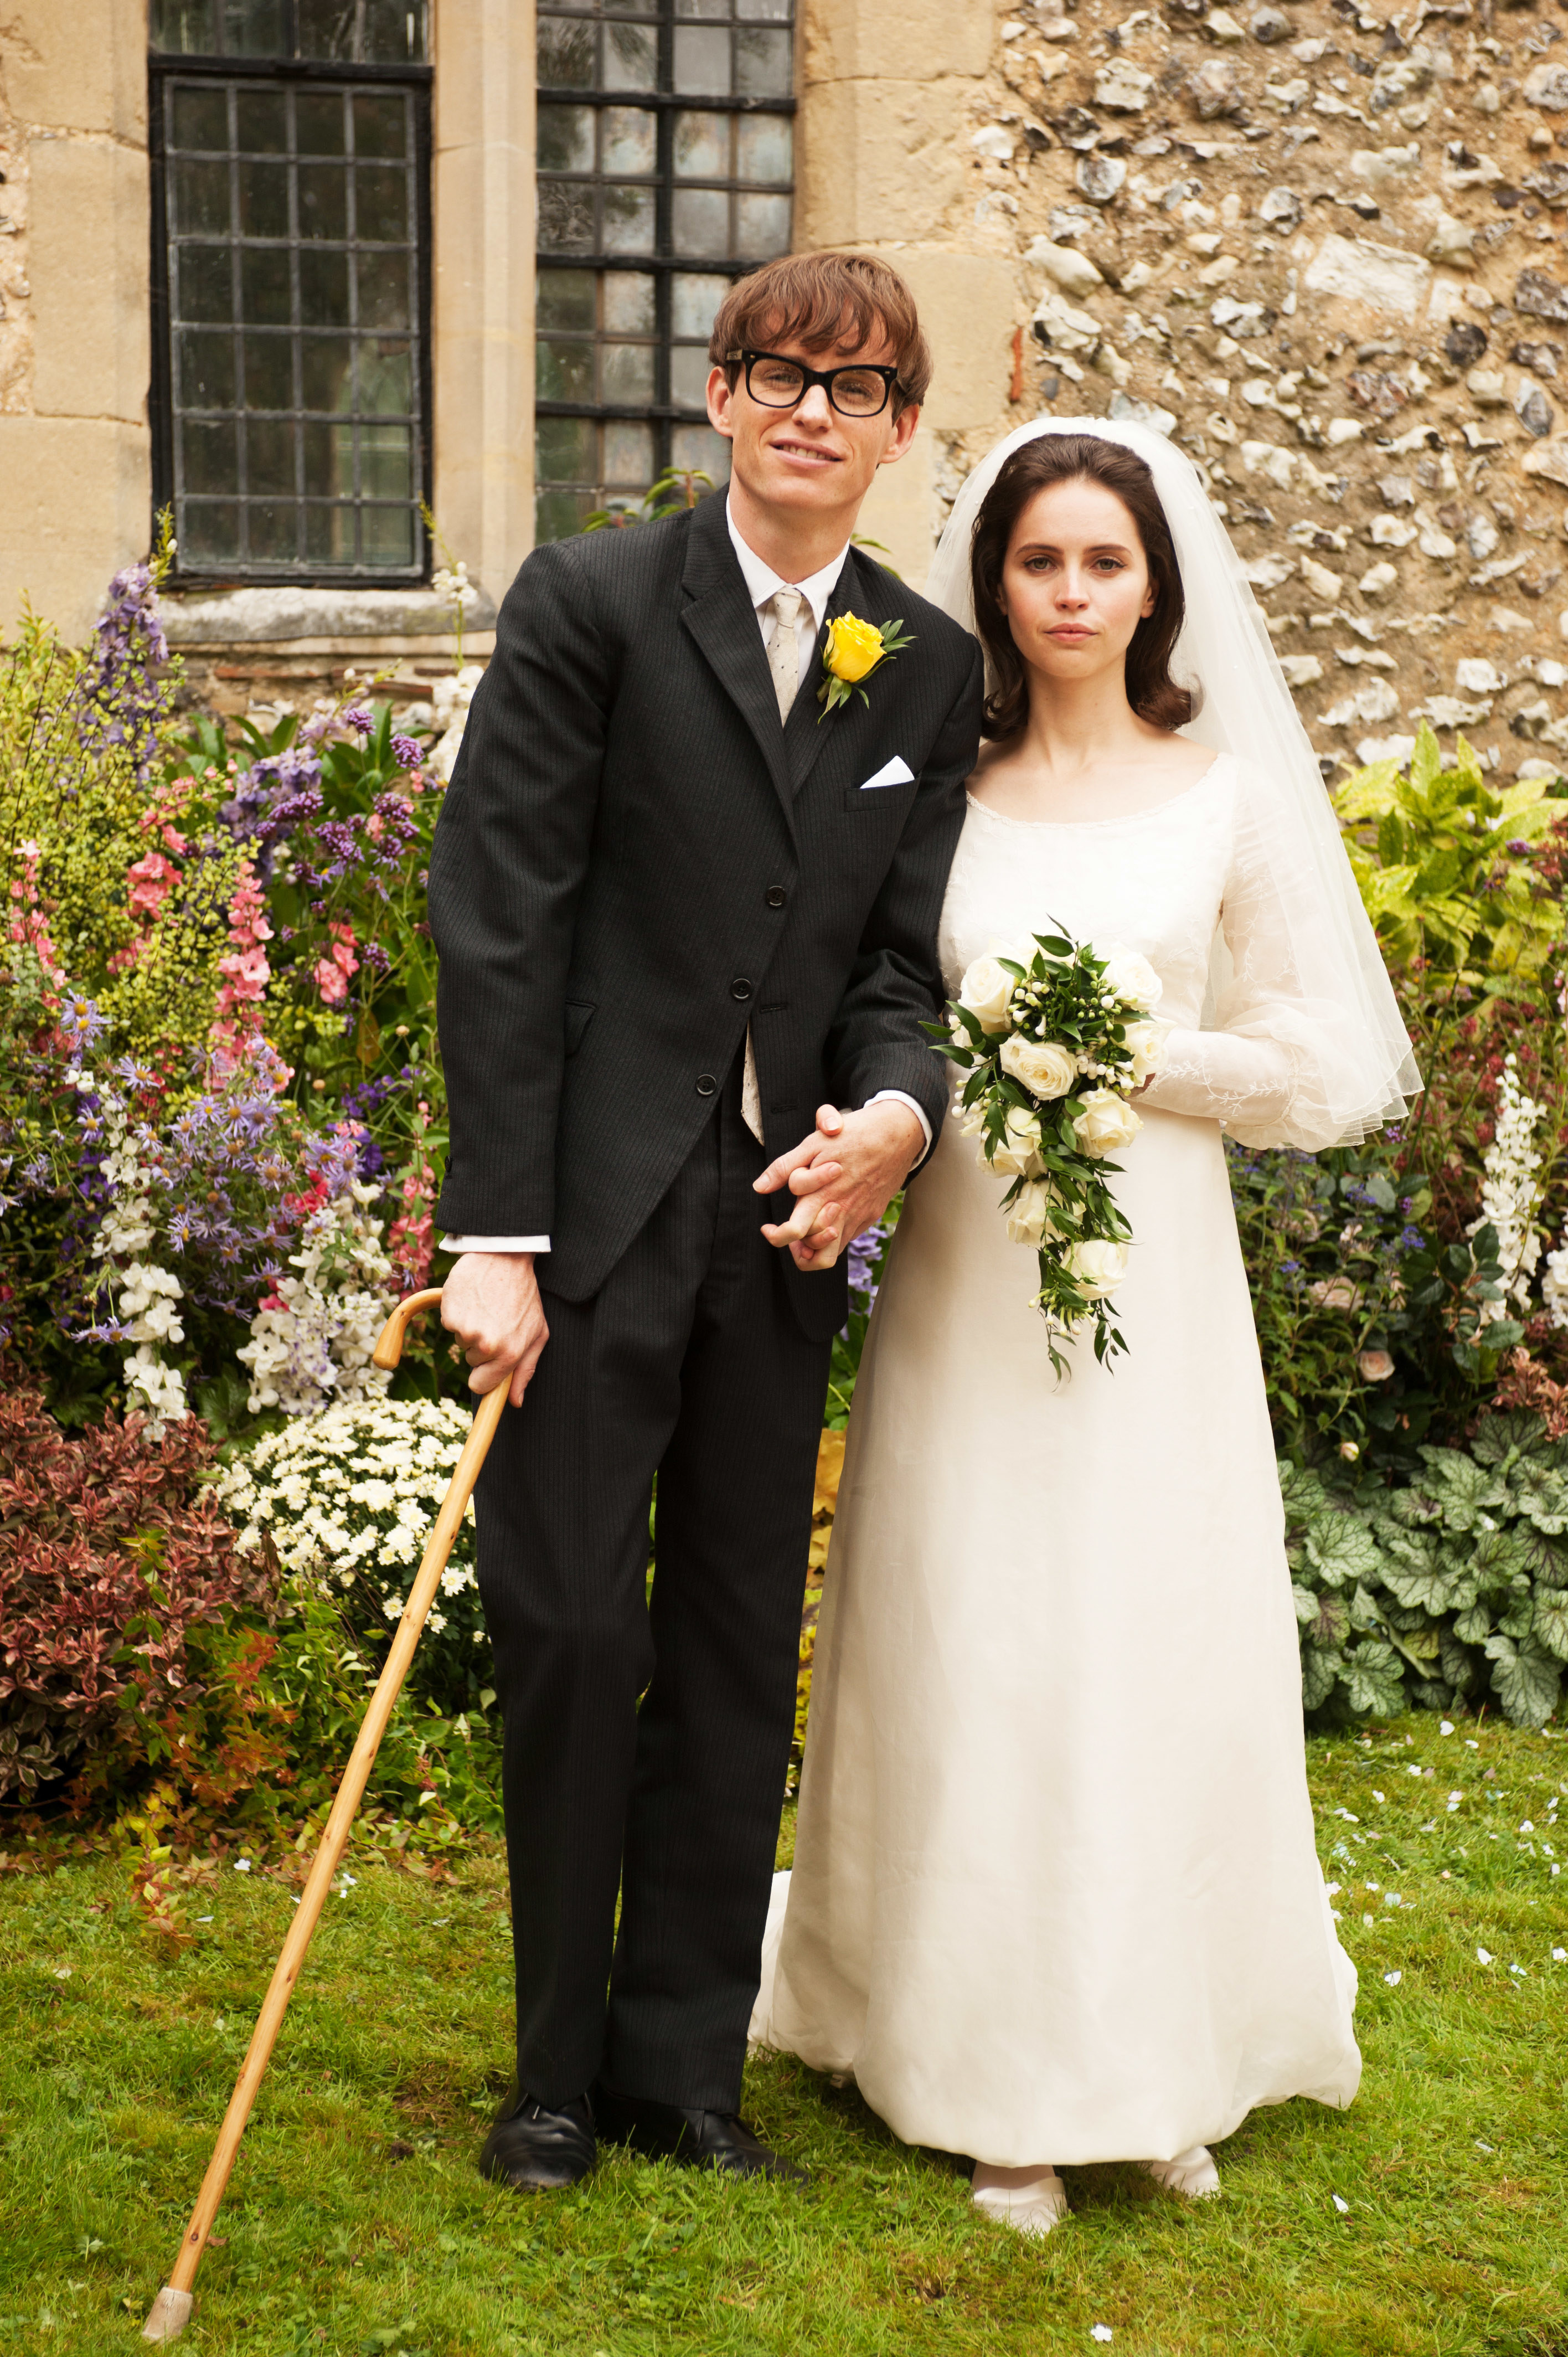 Hawking on his wedding day (in the film)